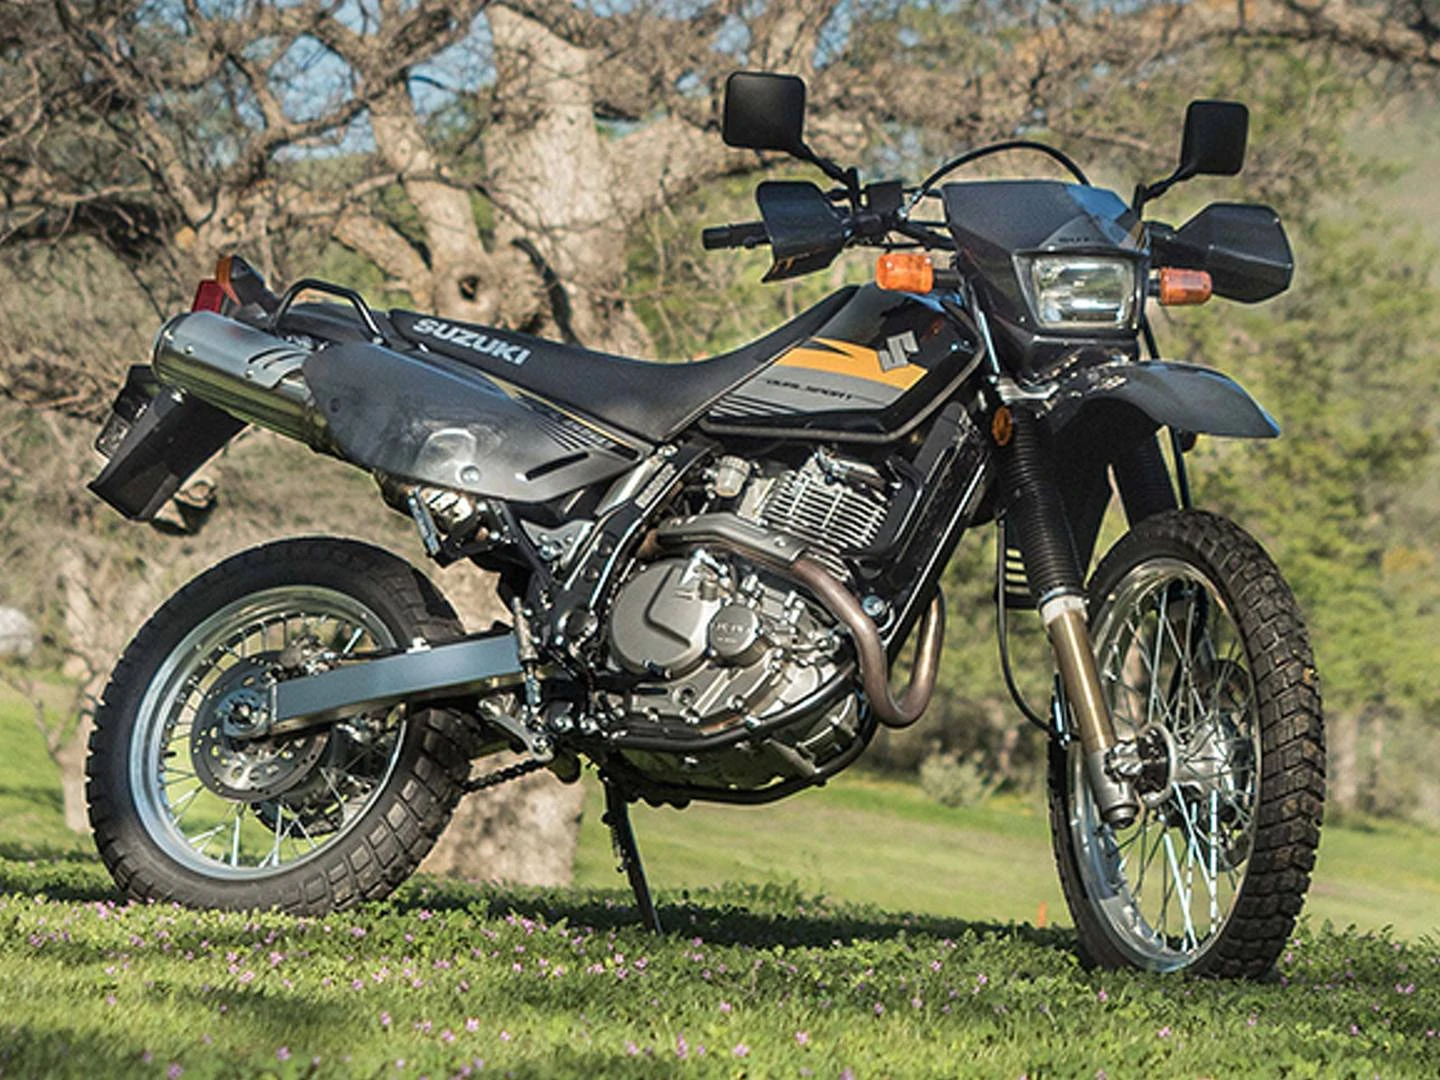 Experience the thrill of off-road adventure with the powerful Suzuki DR650